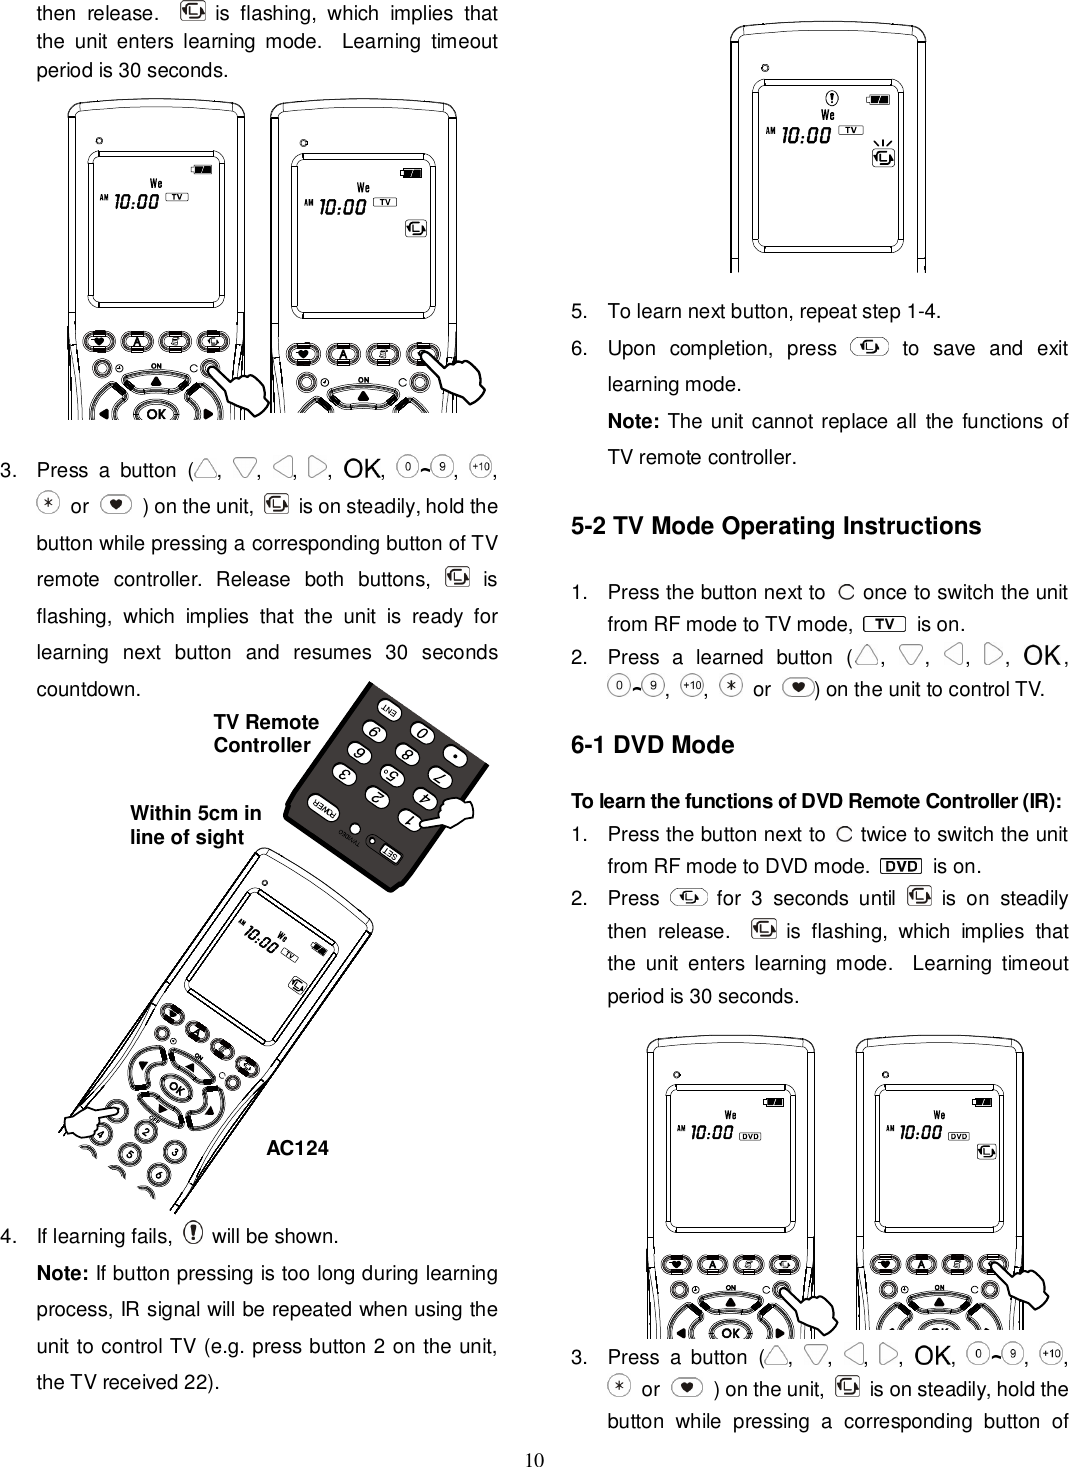 10 then  release.      is  flashing,  which  implies  that the  unit  enters  learning  mode.    Learning  timeout period is 30 seconds.           3.  Press  a  button  ( , , , , ,  ~,  ,  or    ) on the unit,    is on steadily, hold the button while pressing a corresponding button of TV remote  controller.  Release  both  buttons,    is flashing,  which  implies  that  the  unit  is  ready  for learning  next  button  and  resumes  30  seconds countdown.               4.  If learning fails,    will be shown. Note: If button pressing is too long during learning process, IR signal will be repeated when using the unit to control TV (e.g. press button 2 on the unit, the TV received 22).              5.  To learn next button, repeat step 1-4. 6.  Upon  completion,  press   to  save  and  exit learning mode. Note: The unit cannot replace all the  functions of TV remote controller.  5-2 TV Mode Operating Instructions  1.  Press the button next to   once to switch the unit from RF mode to TV mode,   is on. 2.  Press  a  learned  button  ( , , , , , ~,  ,   or ) on the unit to control TV.  6-1 DVD Mode  To learn the functions of DVD Remote Controller (IR): 1.  Press the button next to    twice to switch the unit from RF mode to DVD mode.   is on. 2.  Press    for  3  seconds  until    is  on  steadily then  release.      is  flashing,  which  implies  that the  unit  enters  learning  mode.    Learning  timeout period is 30 seconds.          3.  Press  a  button  ( , , , , ,  ~,  ,  or    ) on the unit,    is on steadily, hold the button  while  pressing  a  corresponding  button  of AC124 TV Remote Controller Within 5cm in line of sight 